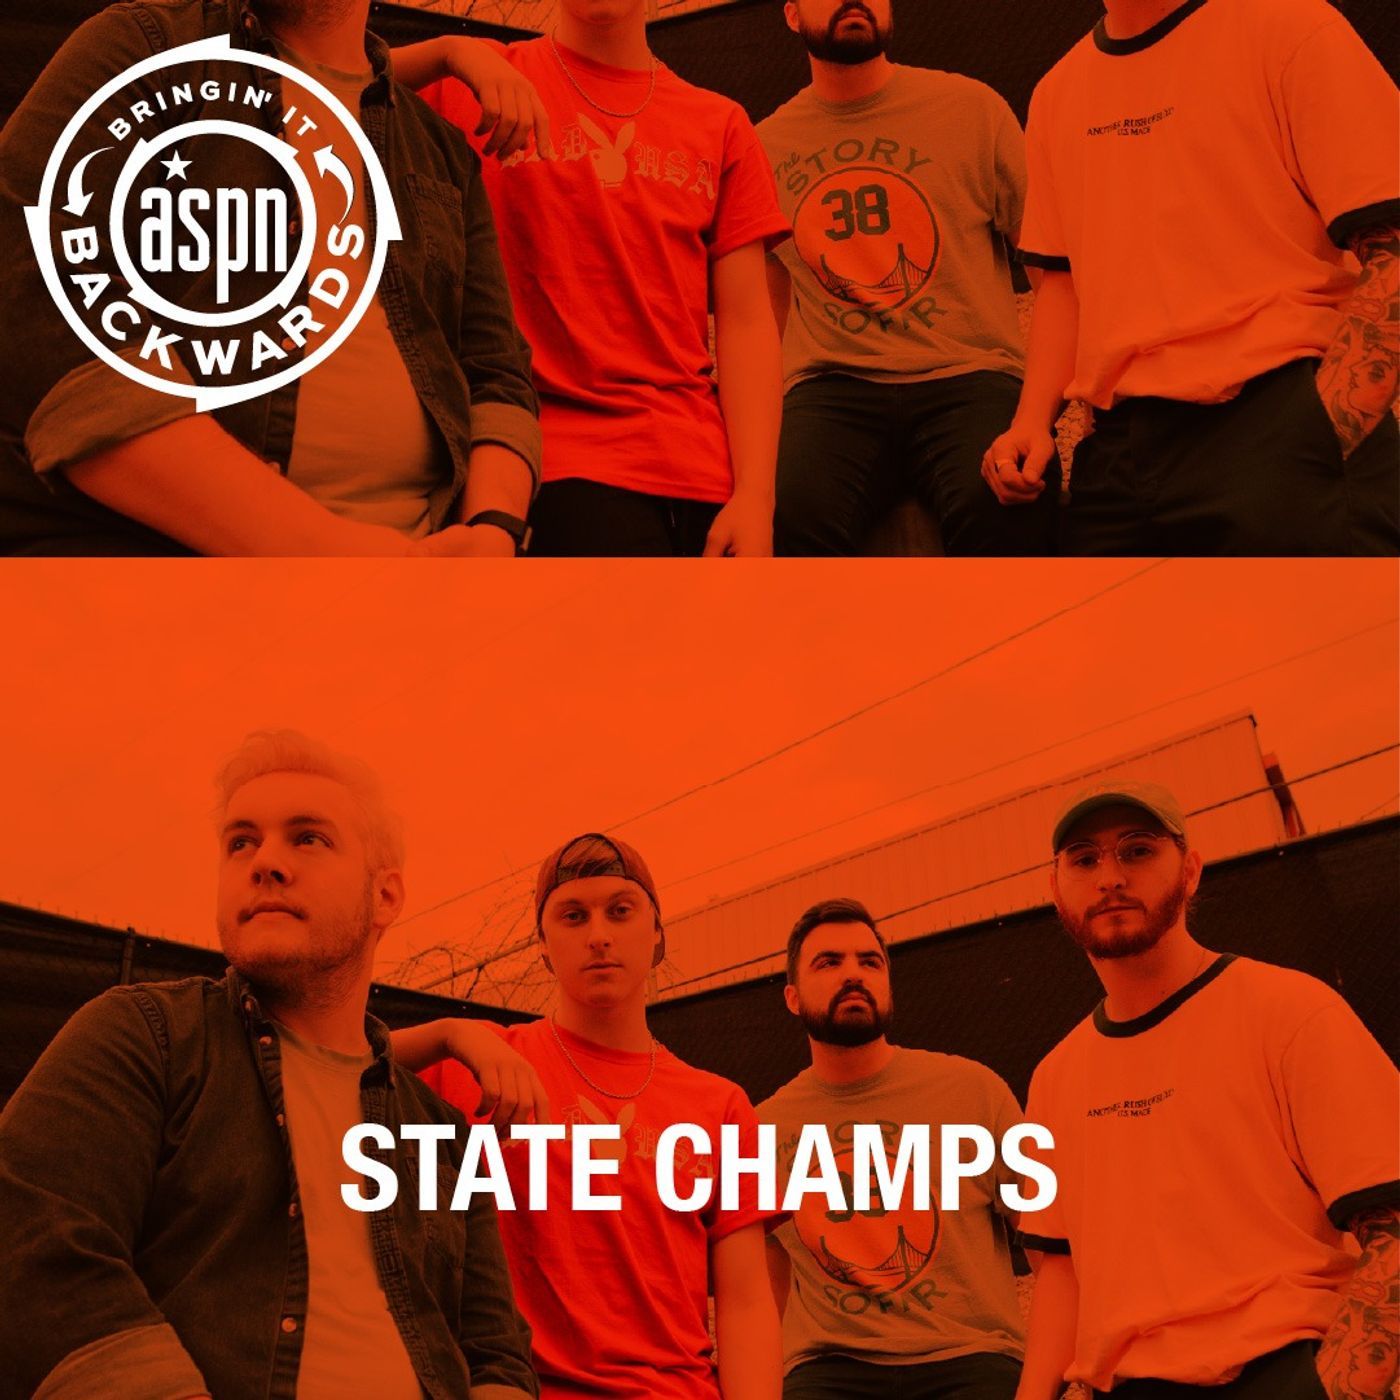 Interview with State Champs Image